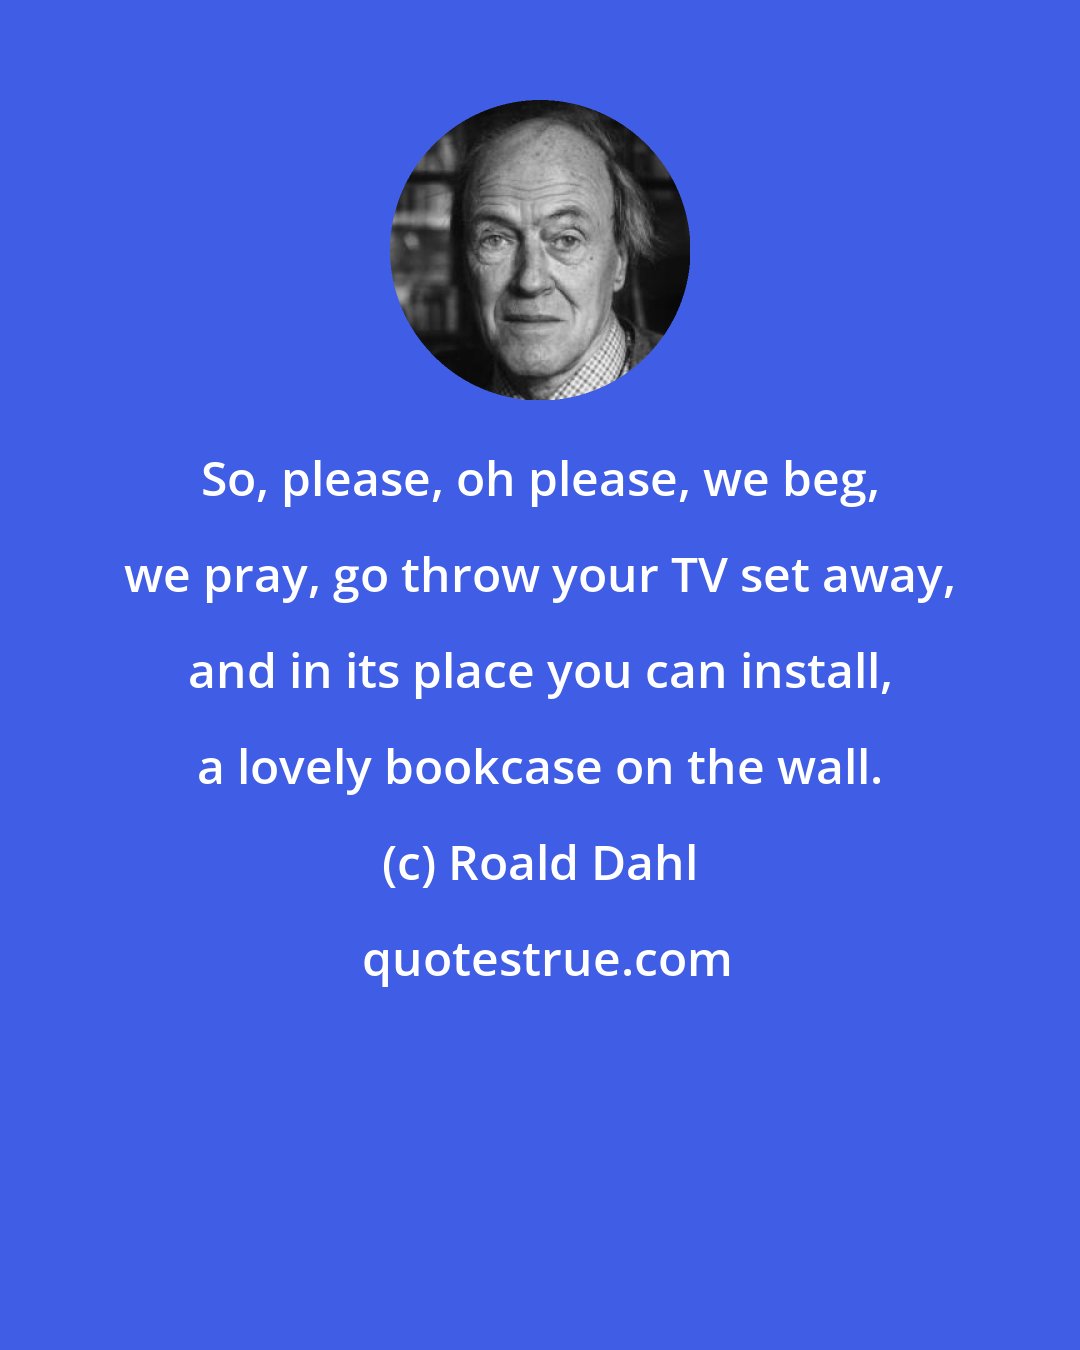 Roald Dahl: So, please, oh please, we beg, we pray, go throw your TV set away, and in its place you can install, a lovely bookcase on the wall.